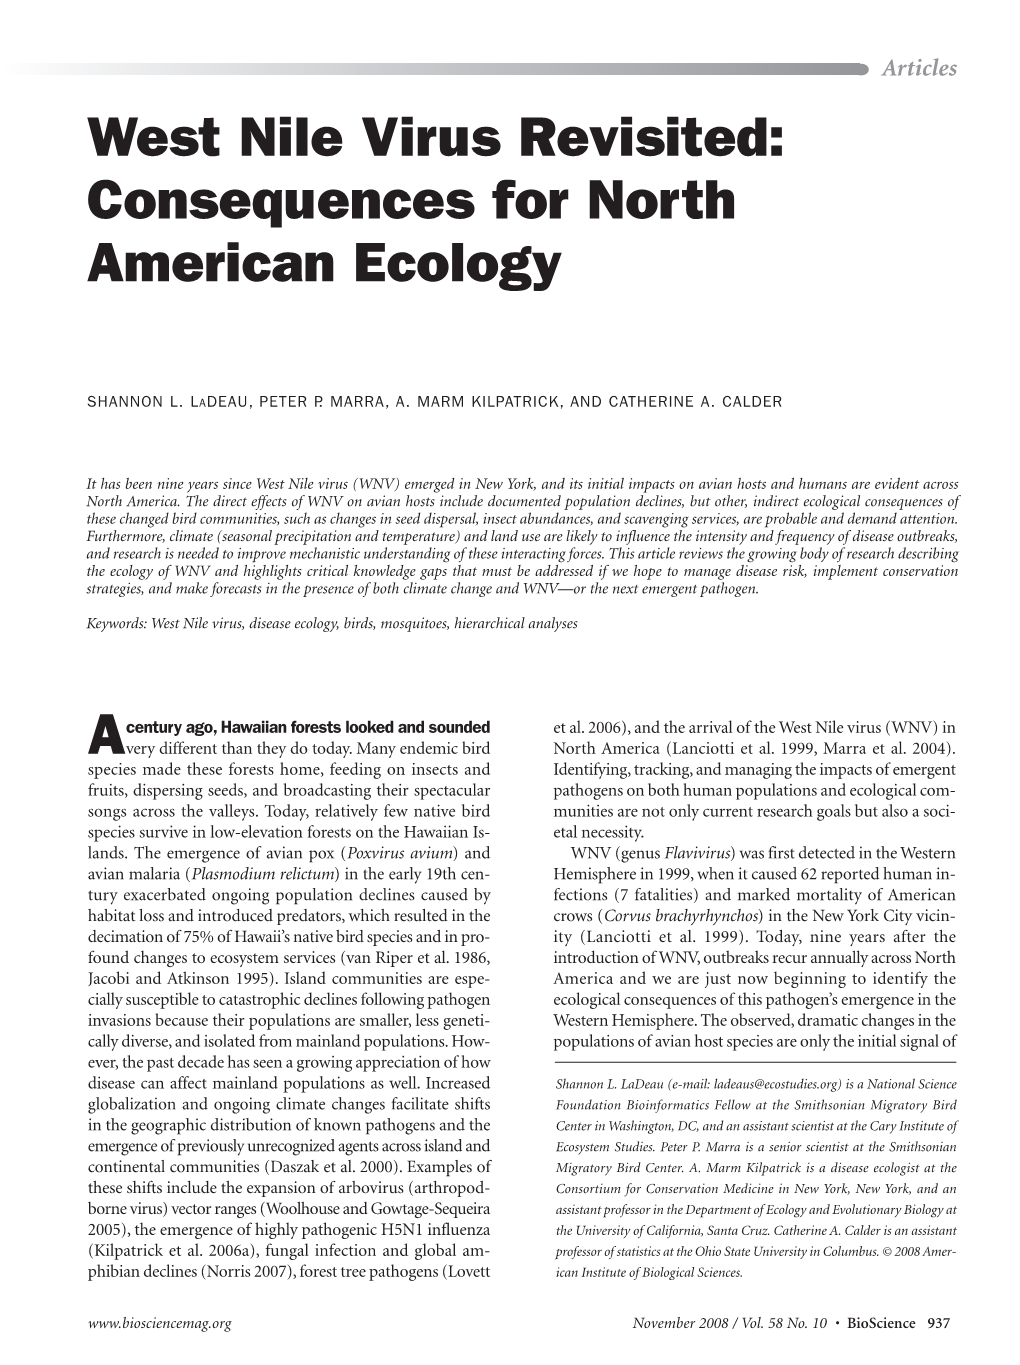 West Nile Virus Revisited: Consequences for North American Ecology